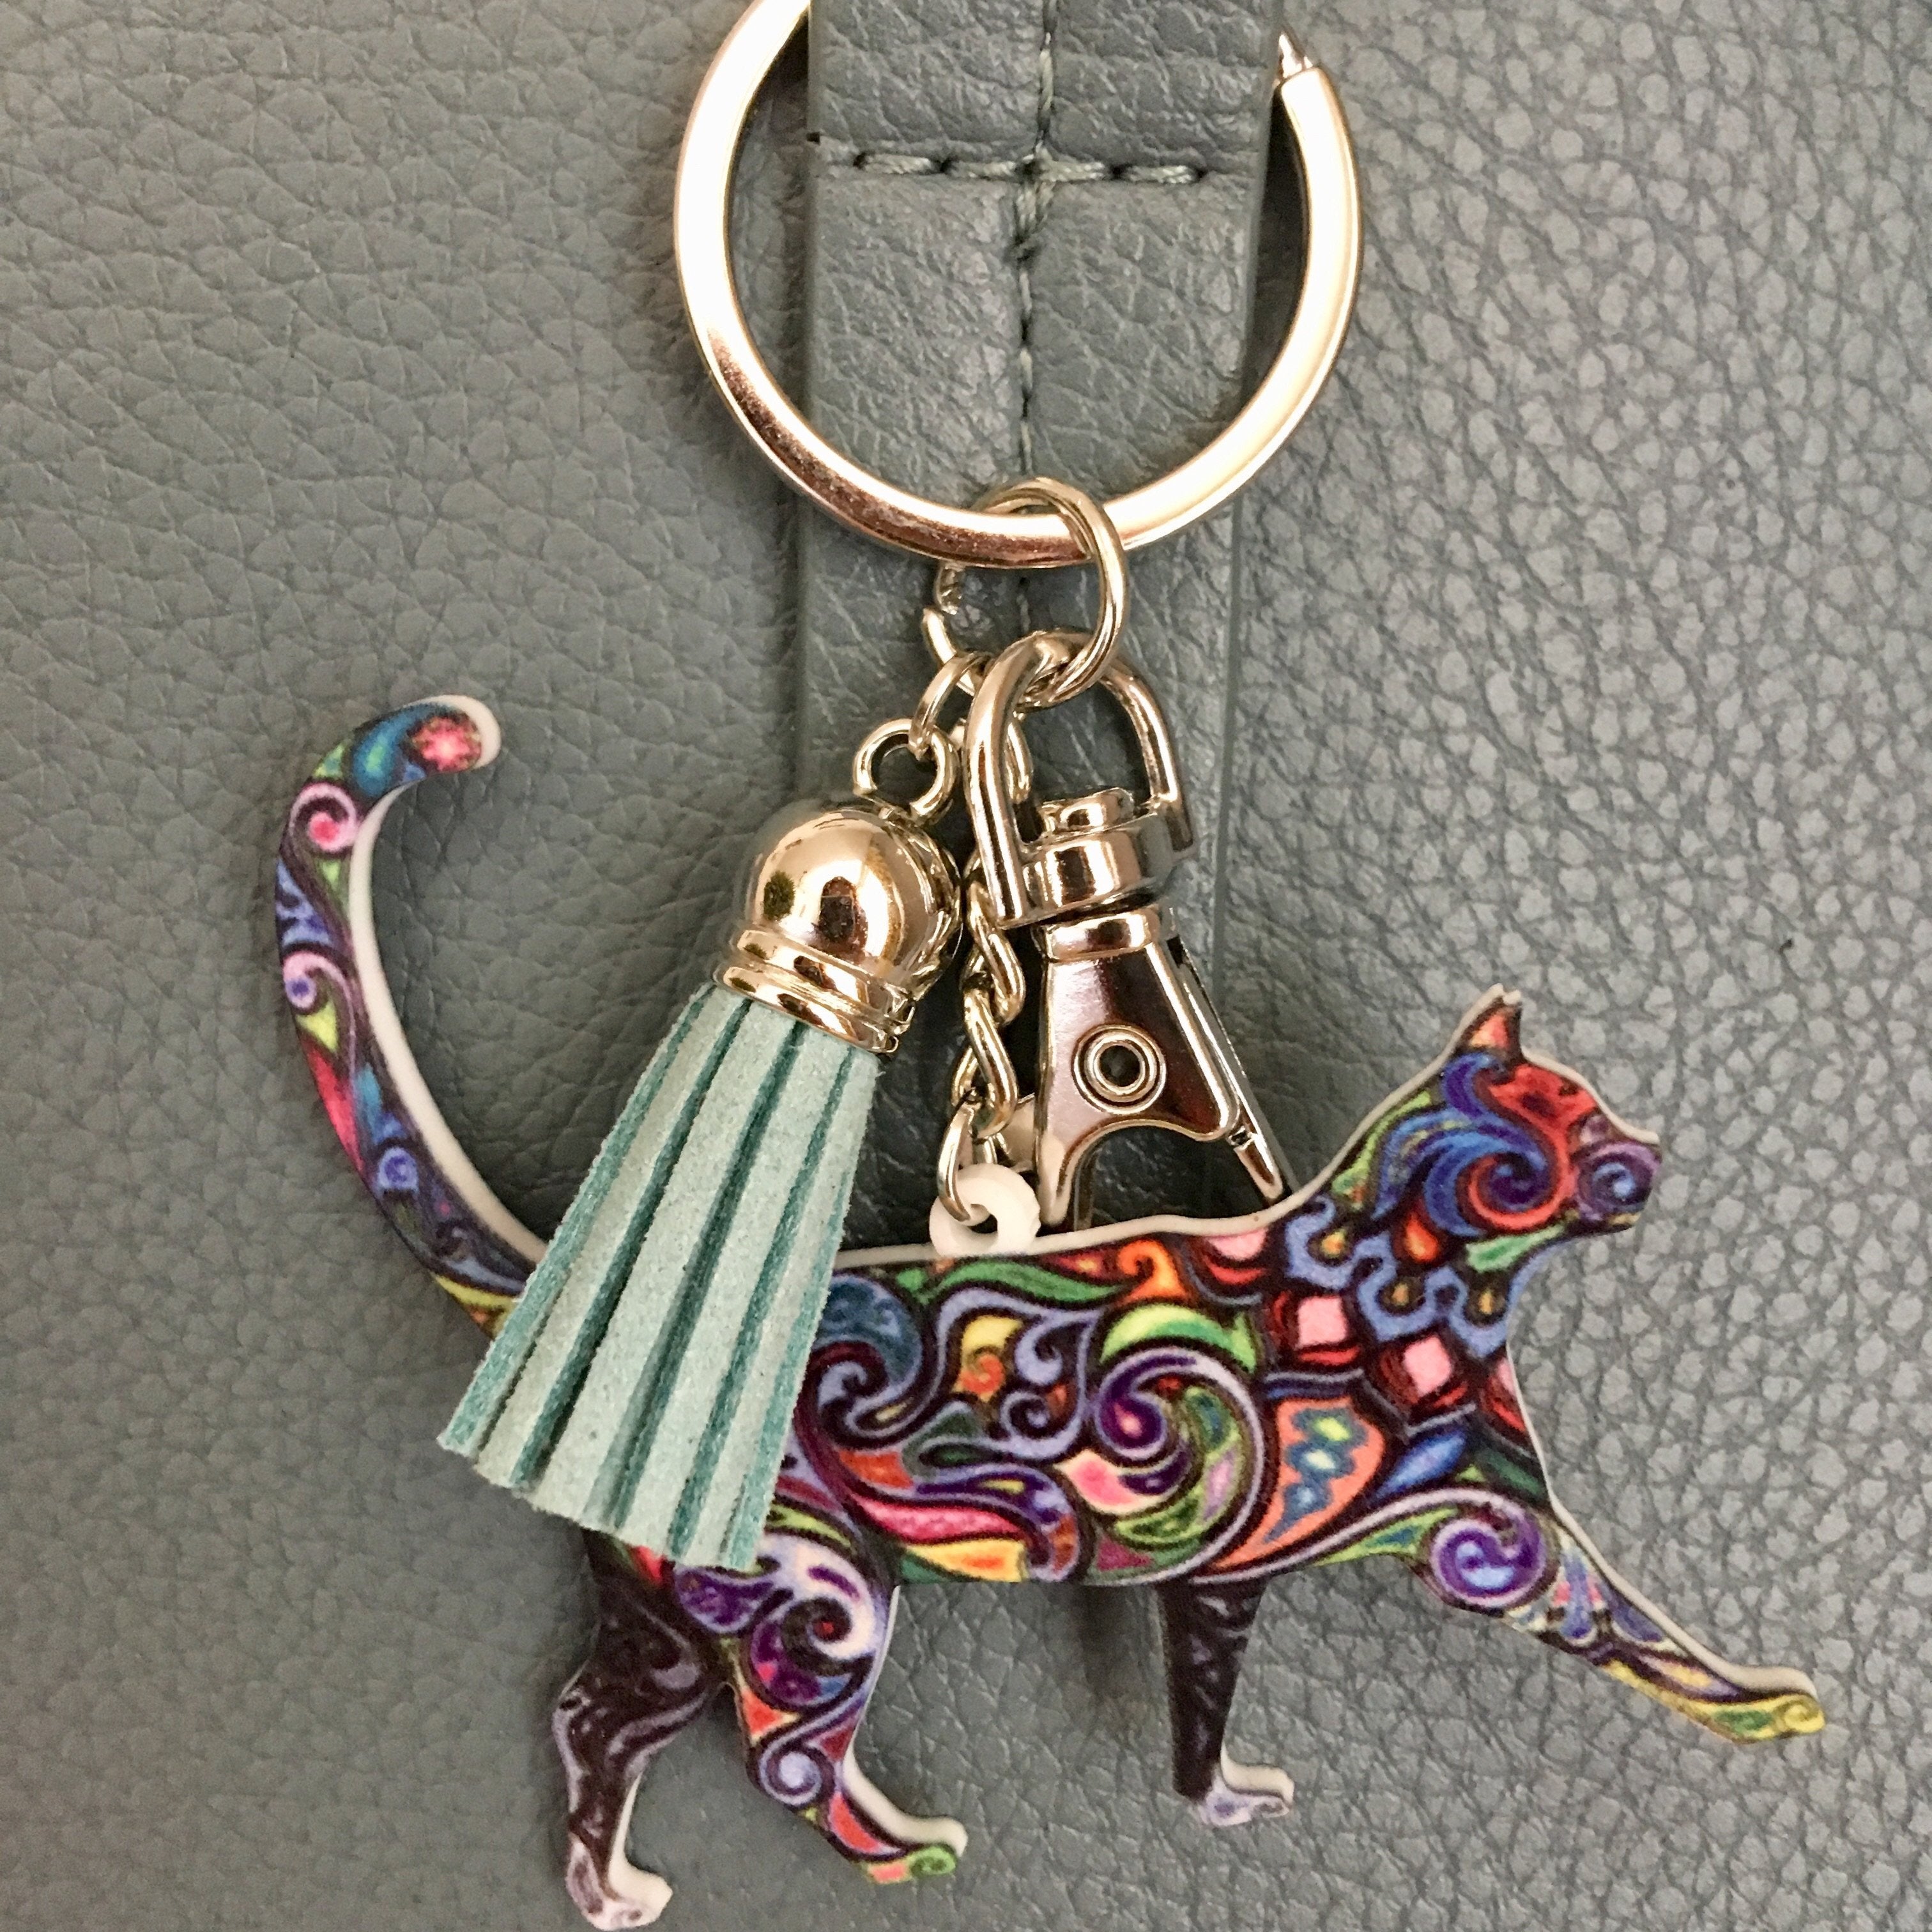 Colorful Cat Key Chain and Bag Charm